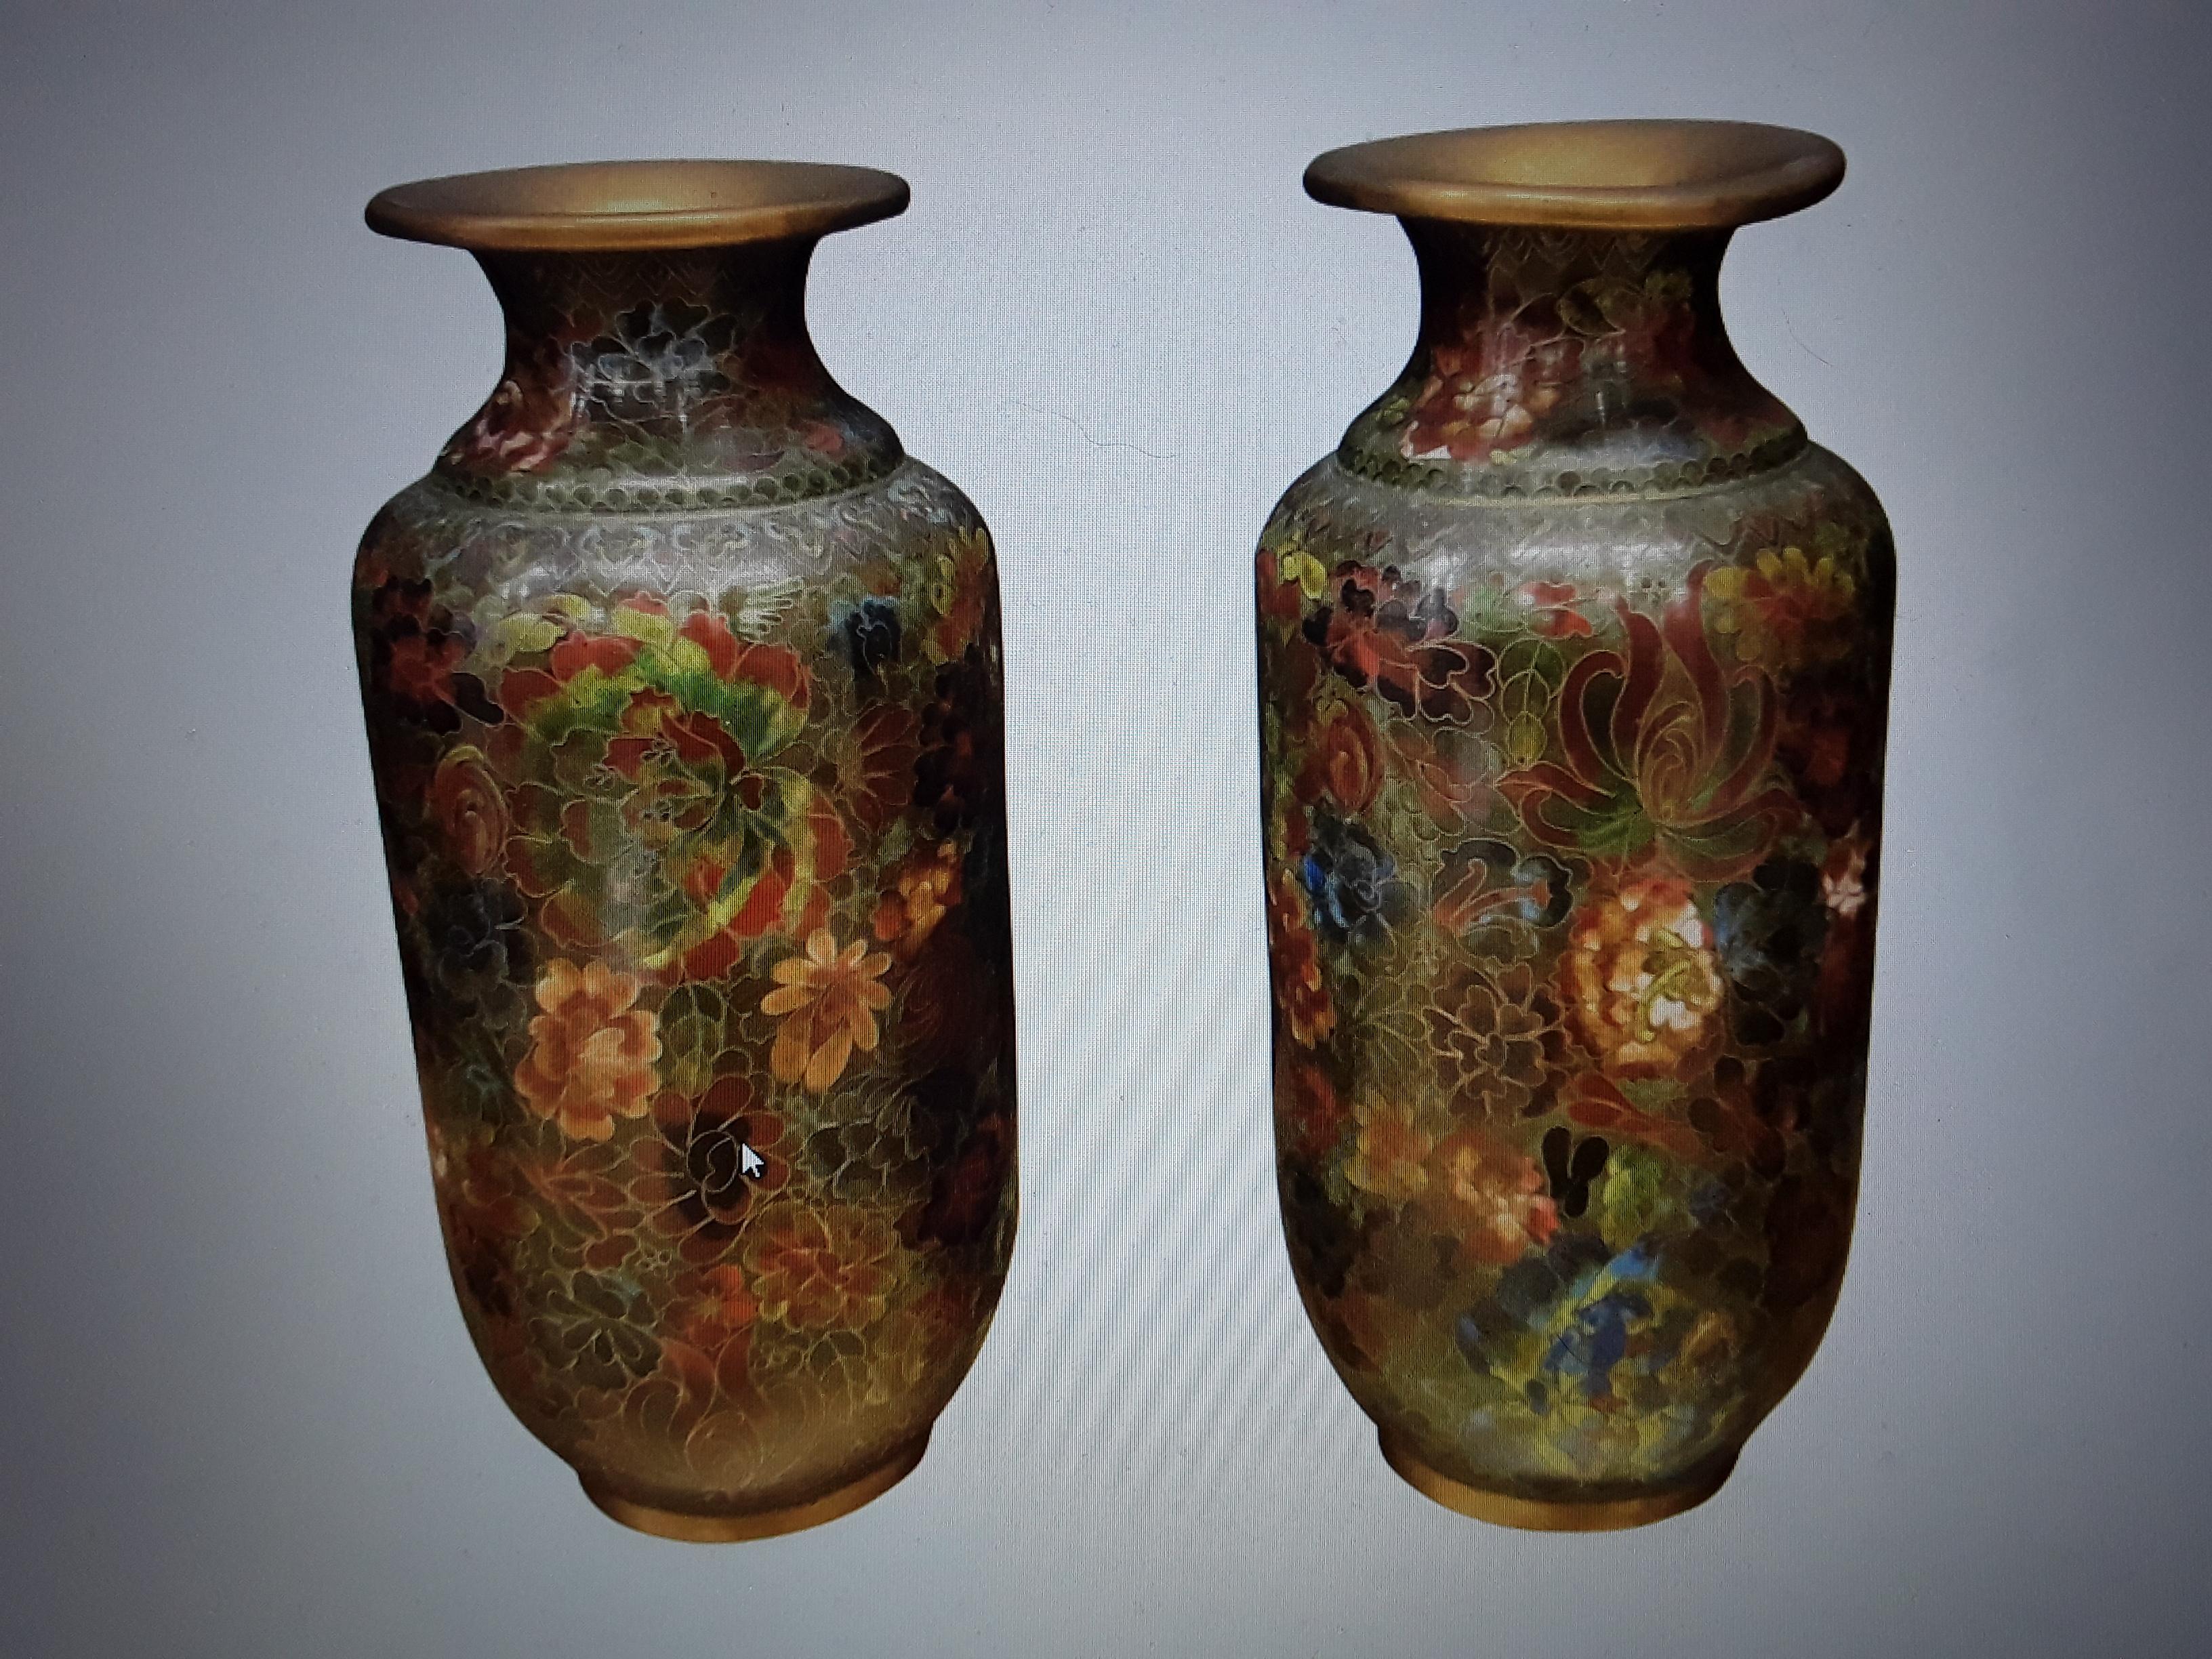 Antique Pair Asian Chinoiserie Cloissone Vase in Green Earth Tones For Sale 5